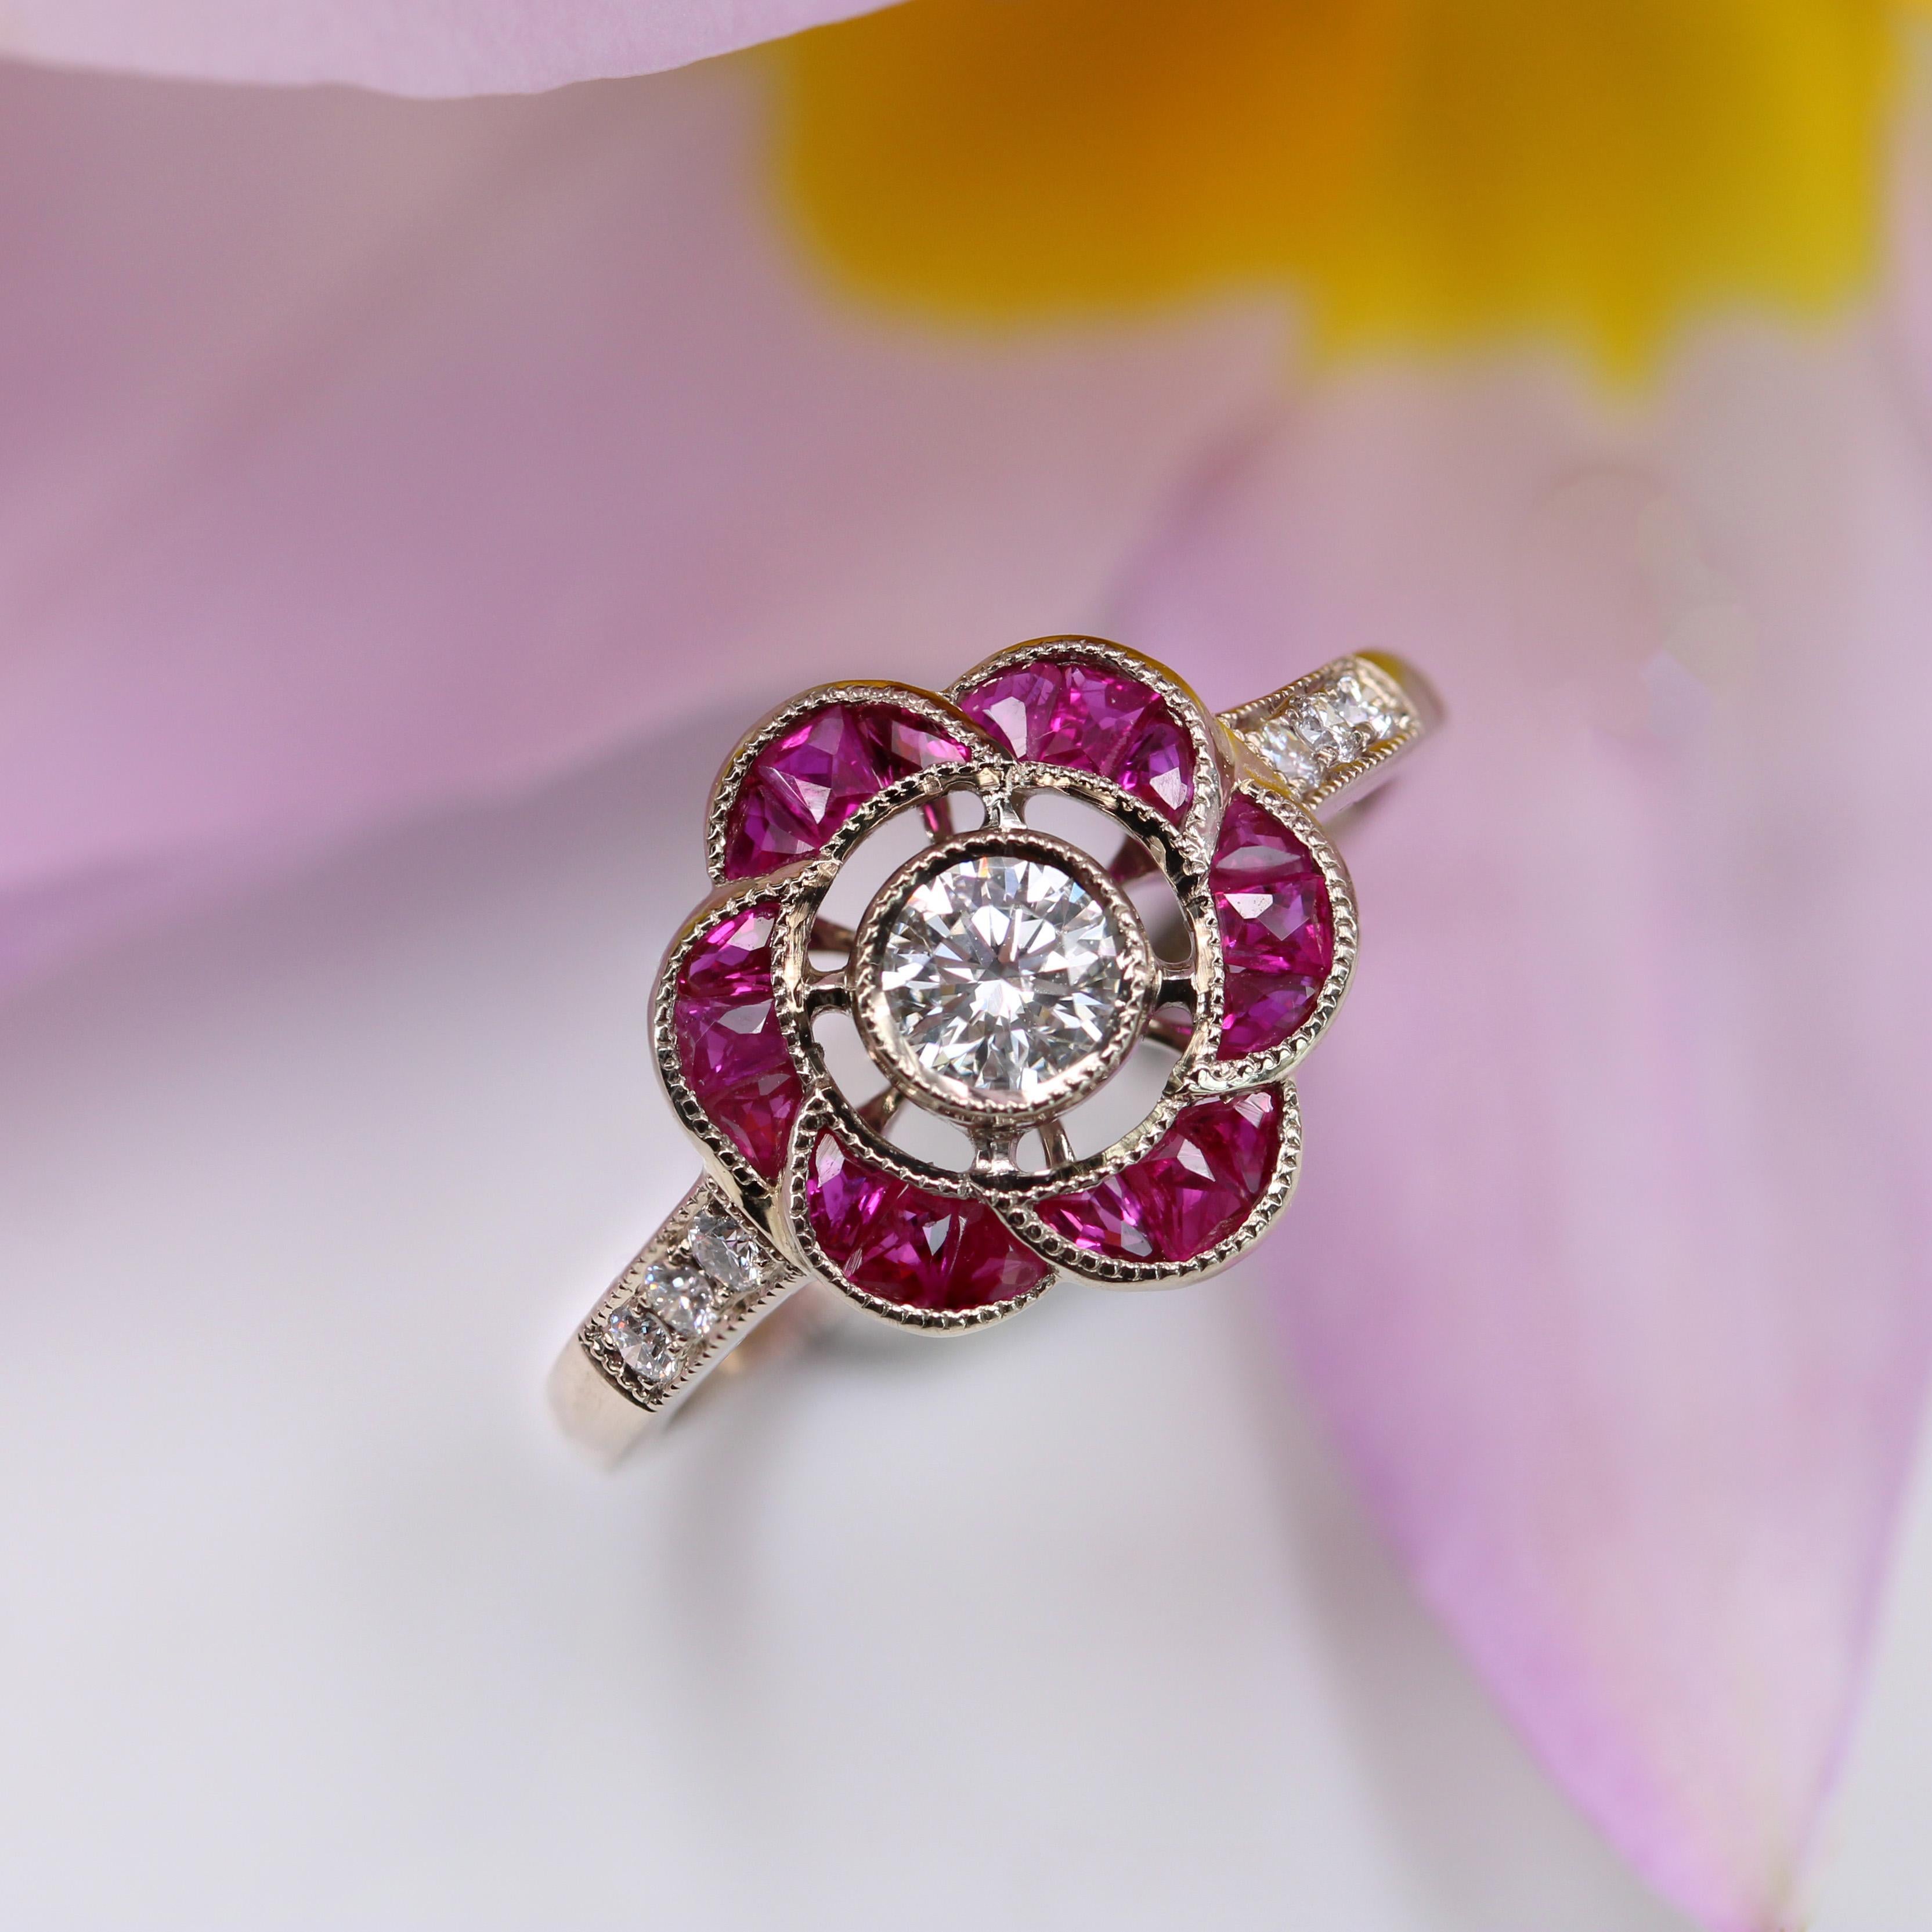 New Art Deco Style Calibrated Rubies Diamonds 18 Karat White Gold Flower Ring For Sale 5